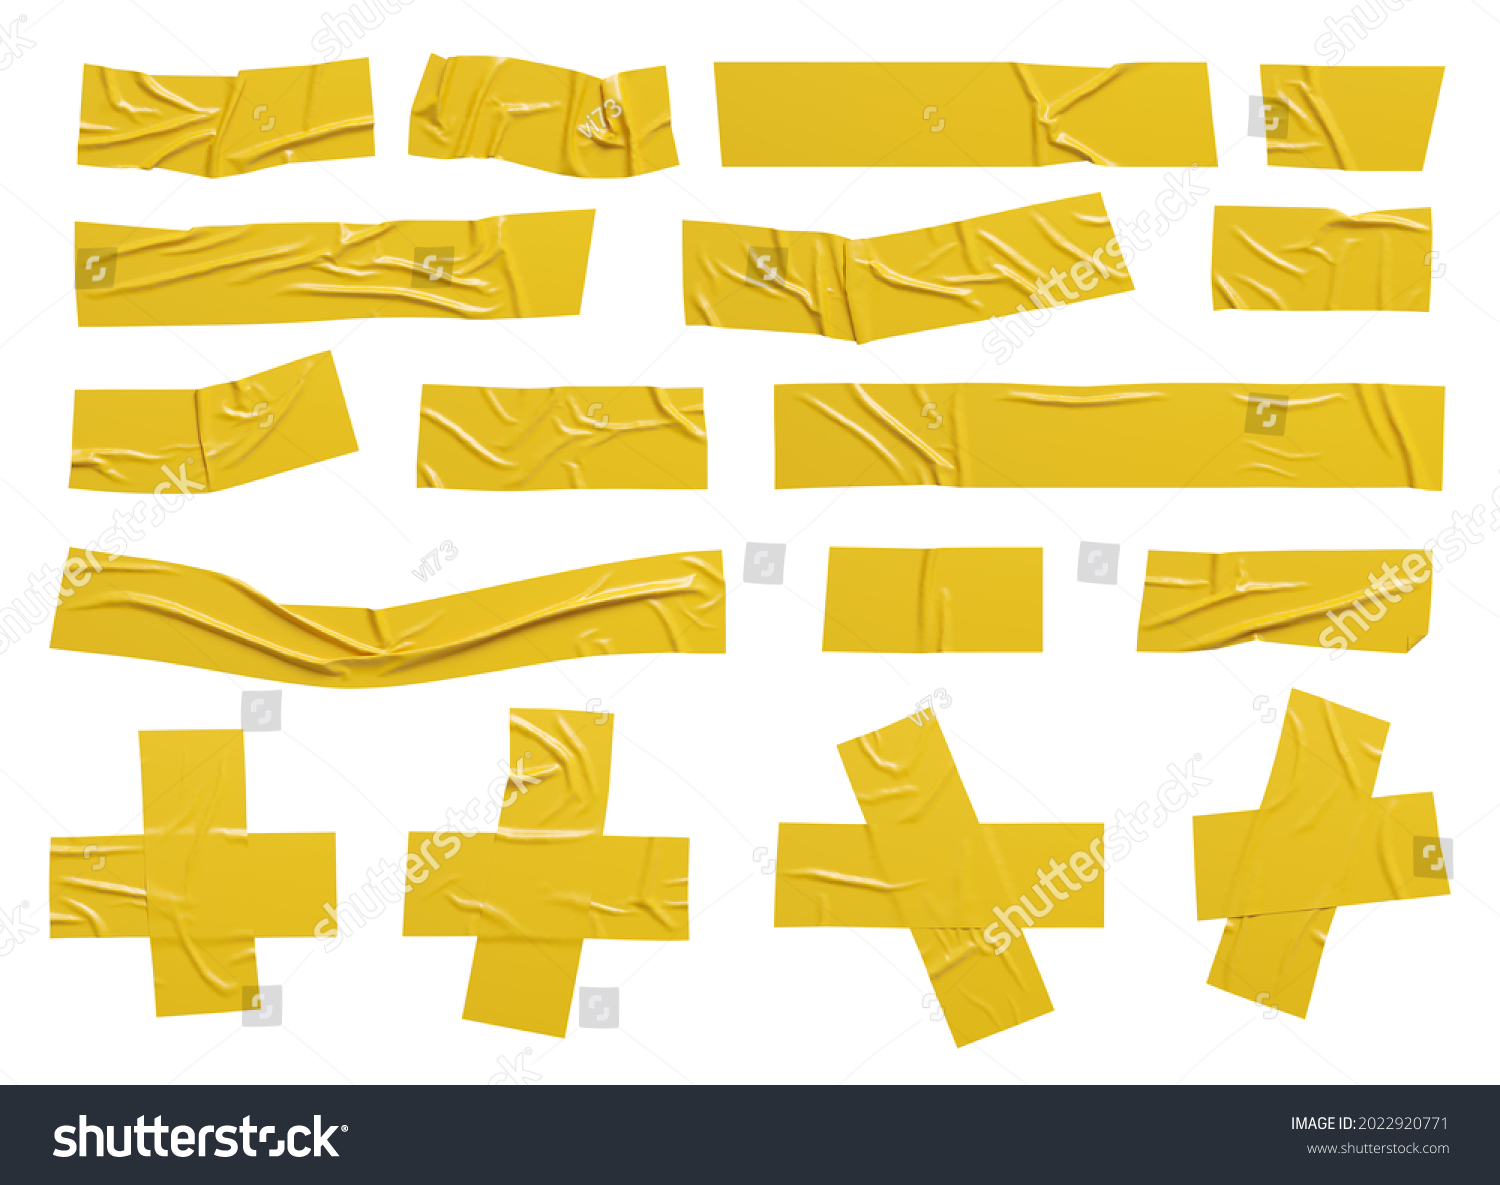 Isolated wrinkled yellow adhesive tape pieces. #2022920771